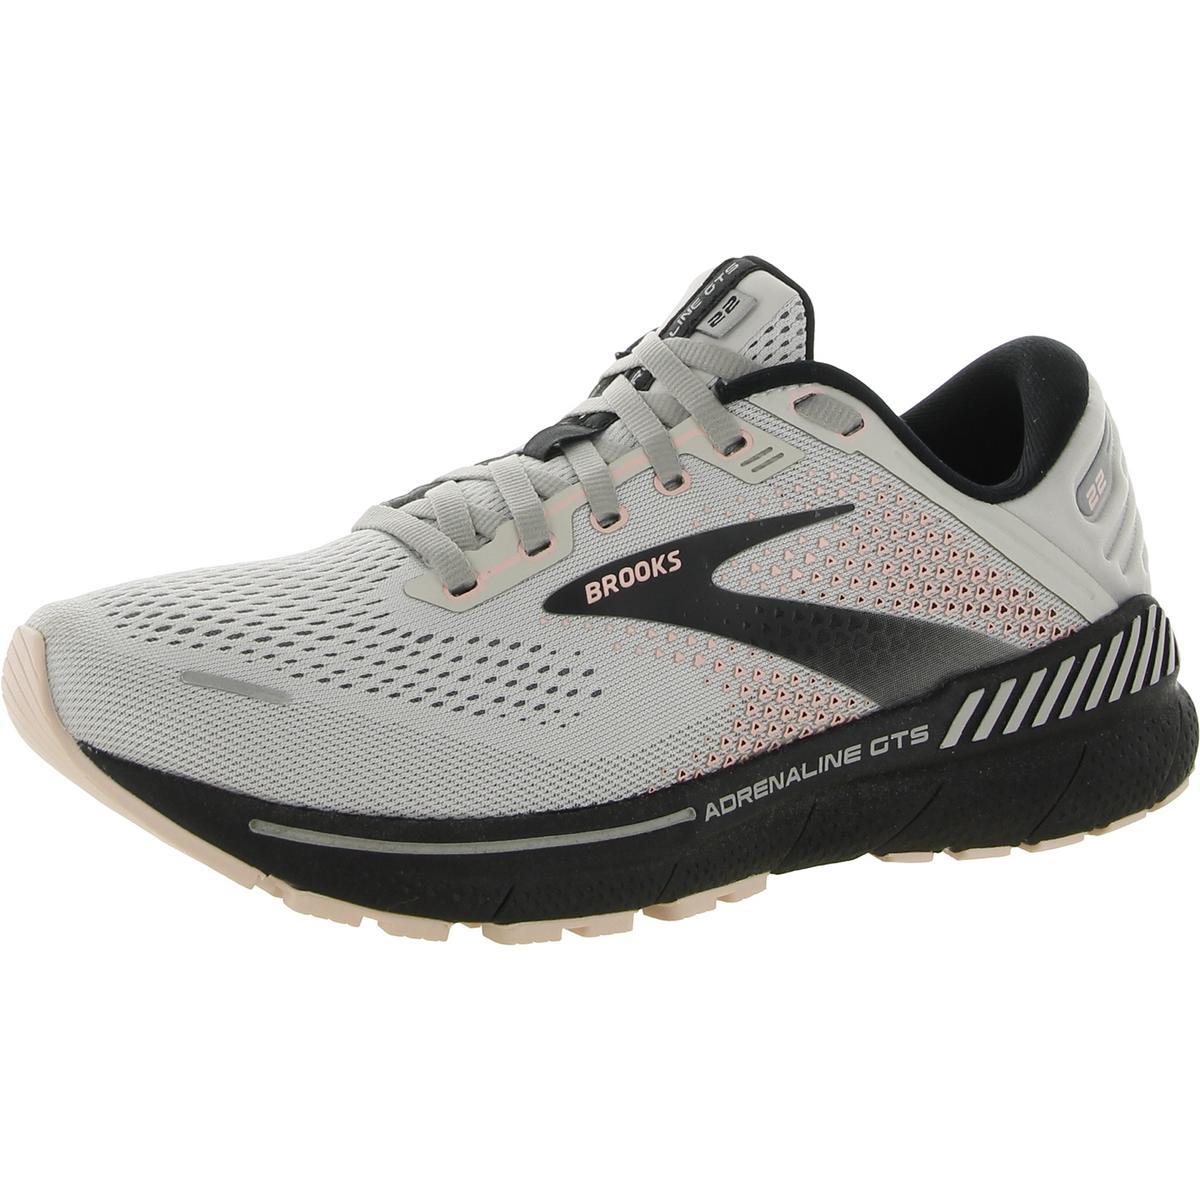 Brooks Womens Adrenaline Gts 22 Athletic and Training Shoes Sneakers Bhfo 7537 Grey/PInk/Black